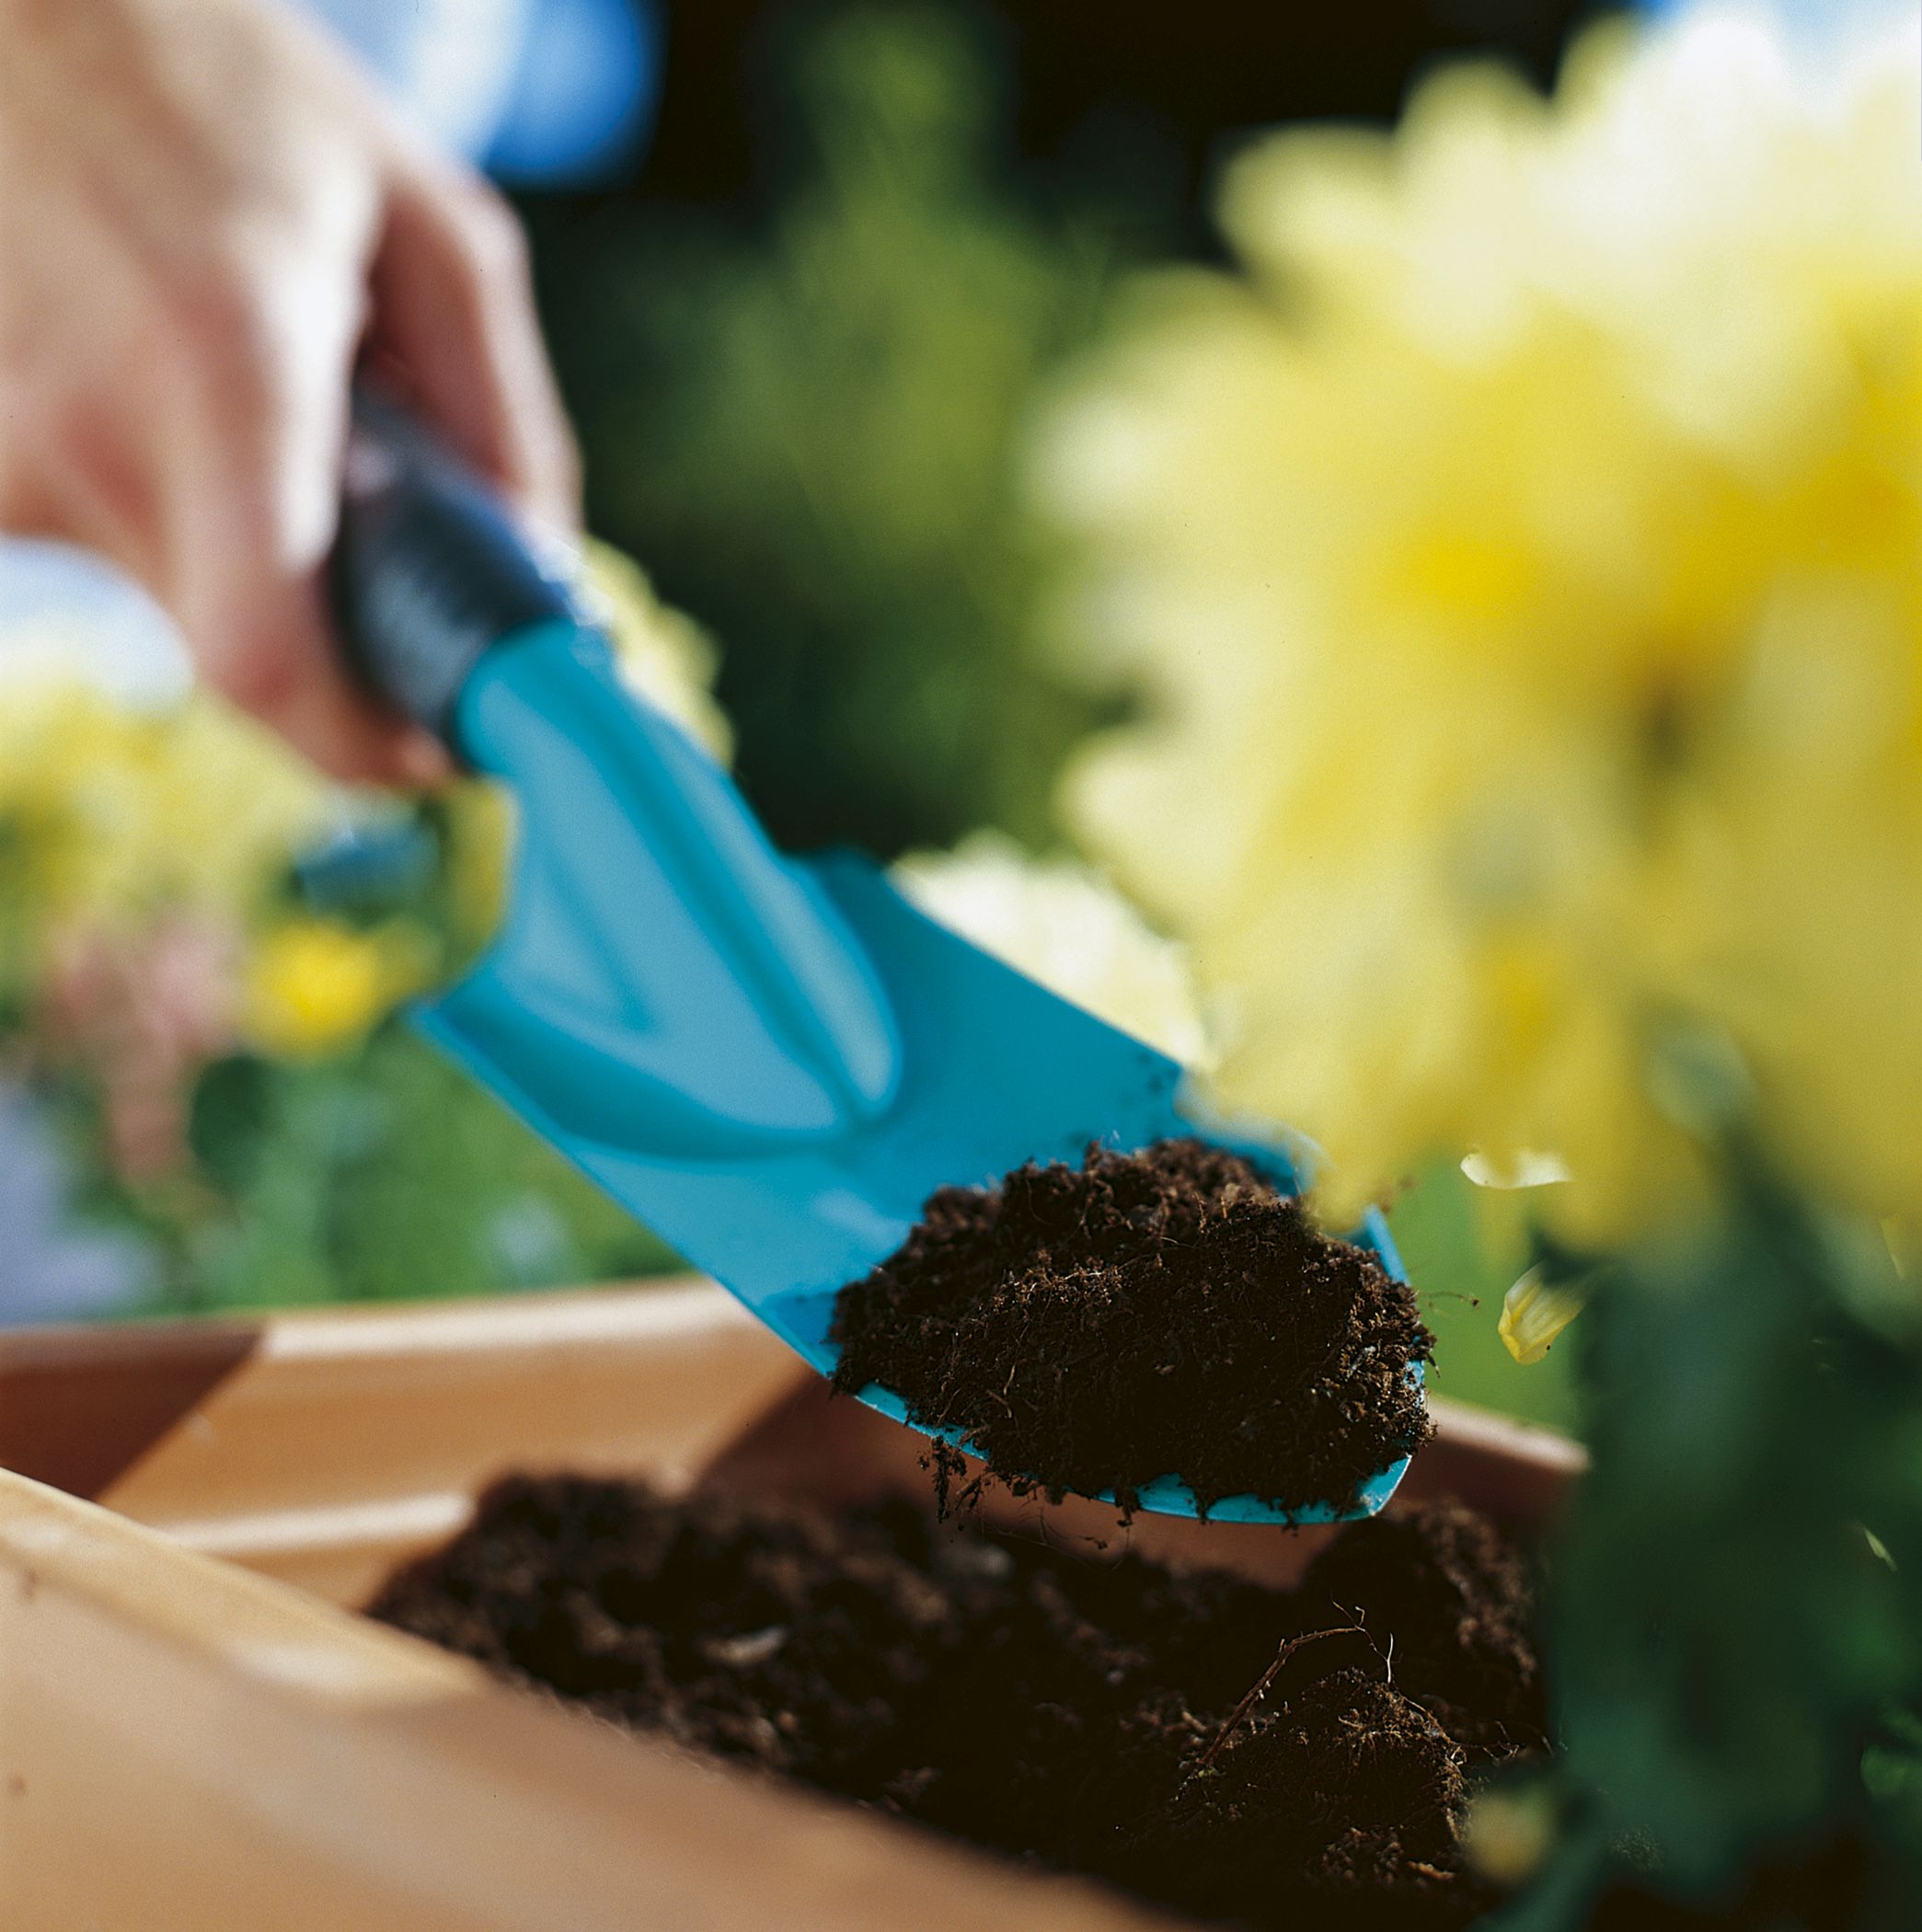 Don’t have green fingers? How to keep your garden alive